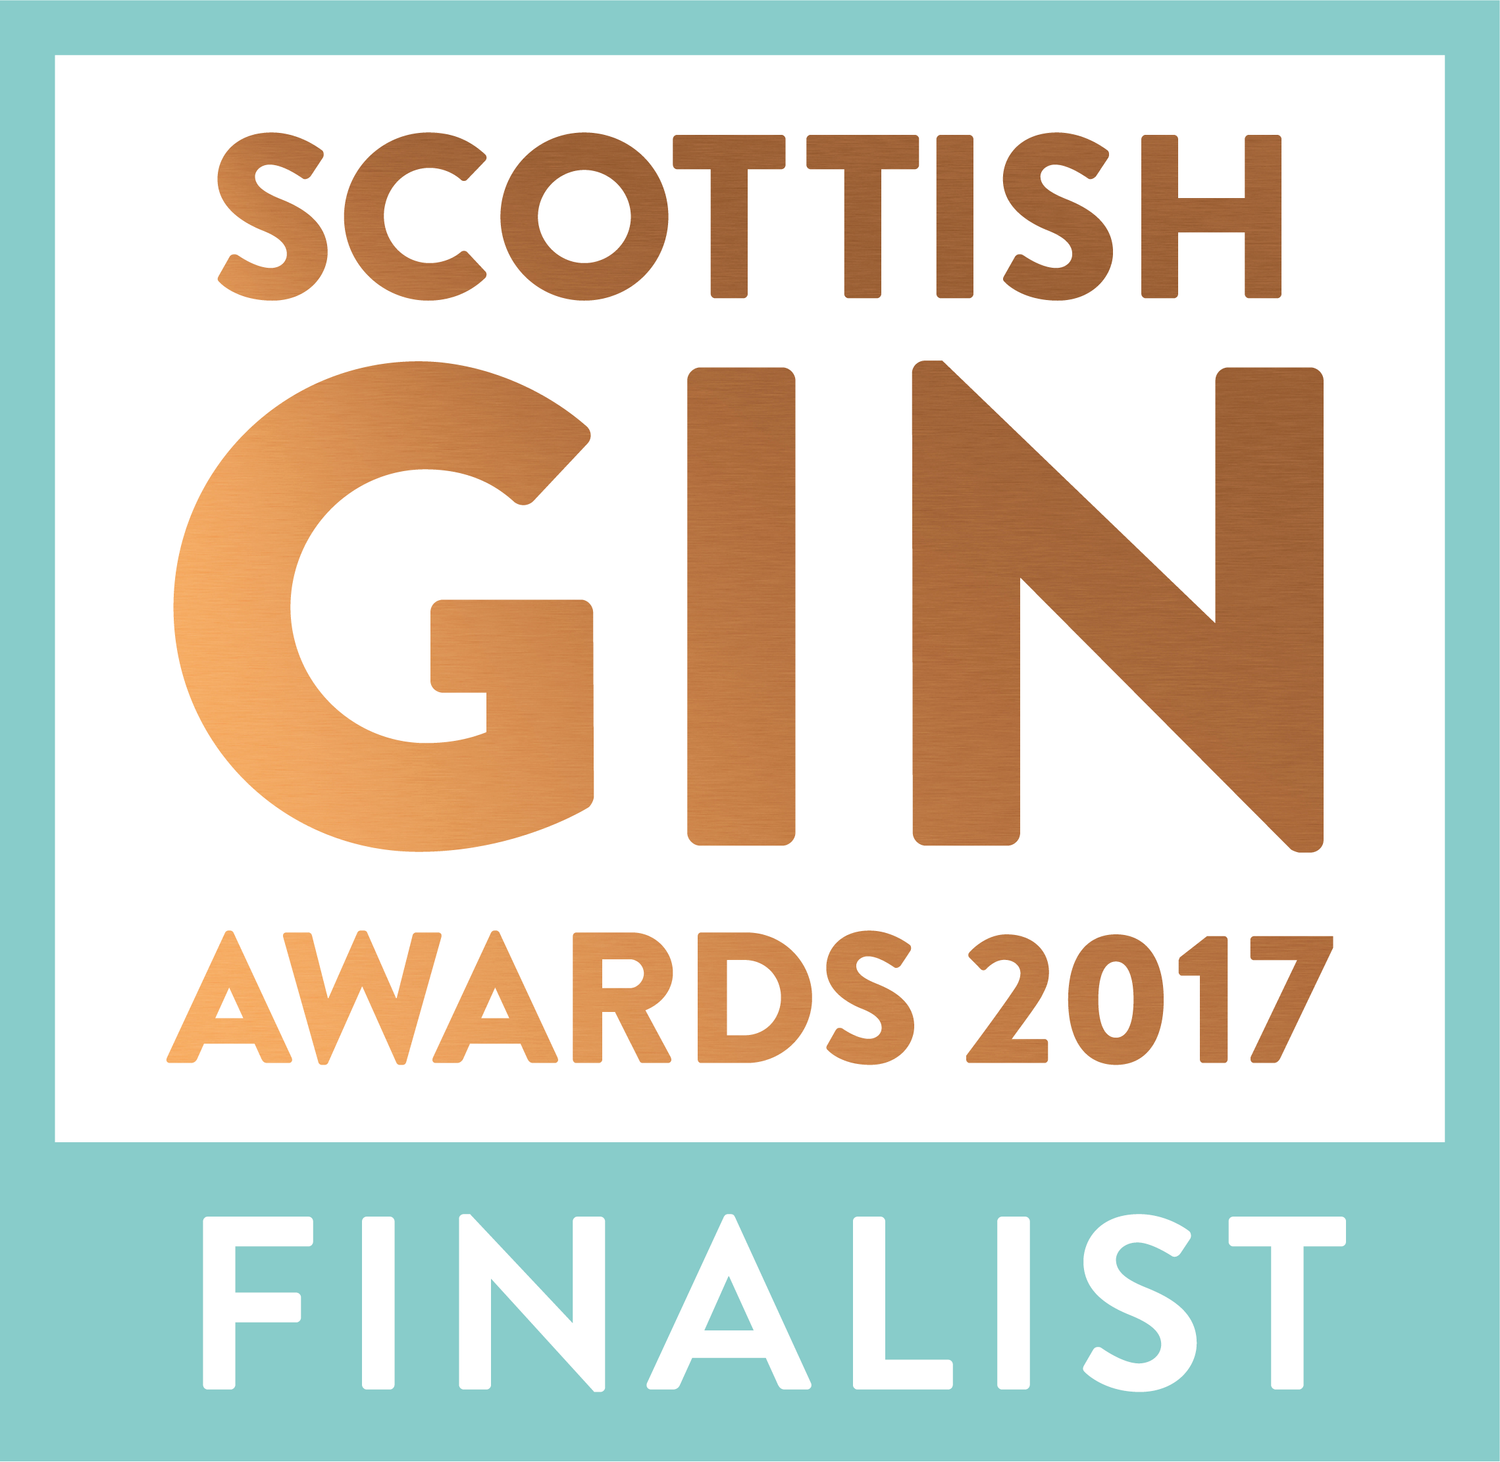 We made the Scottish Gin Awards Finals!